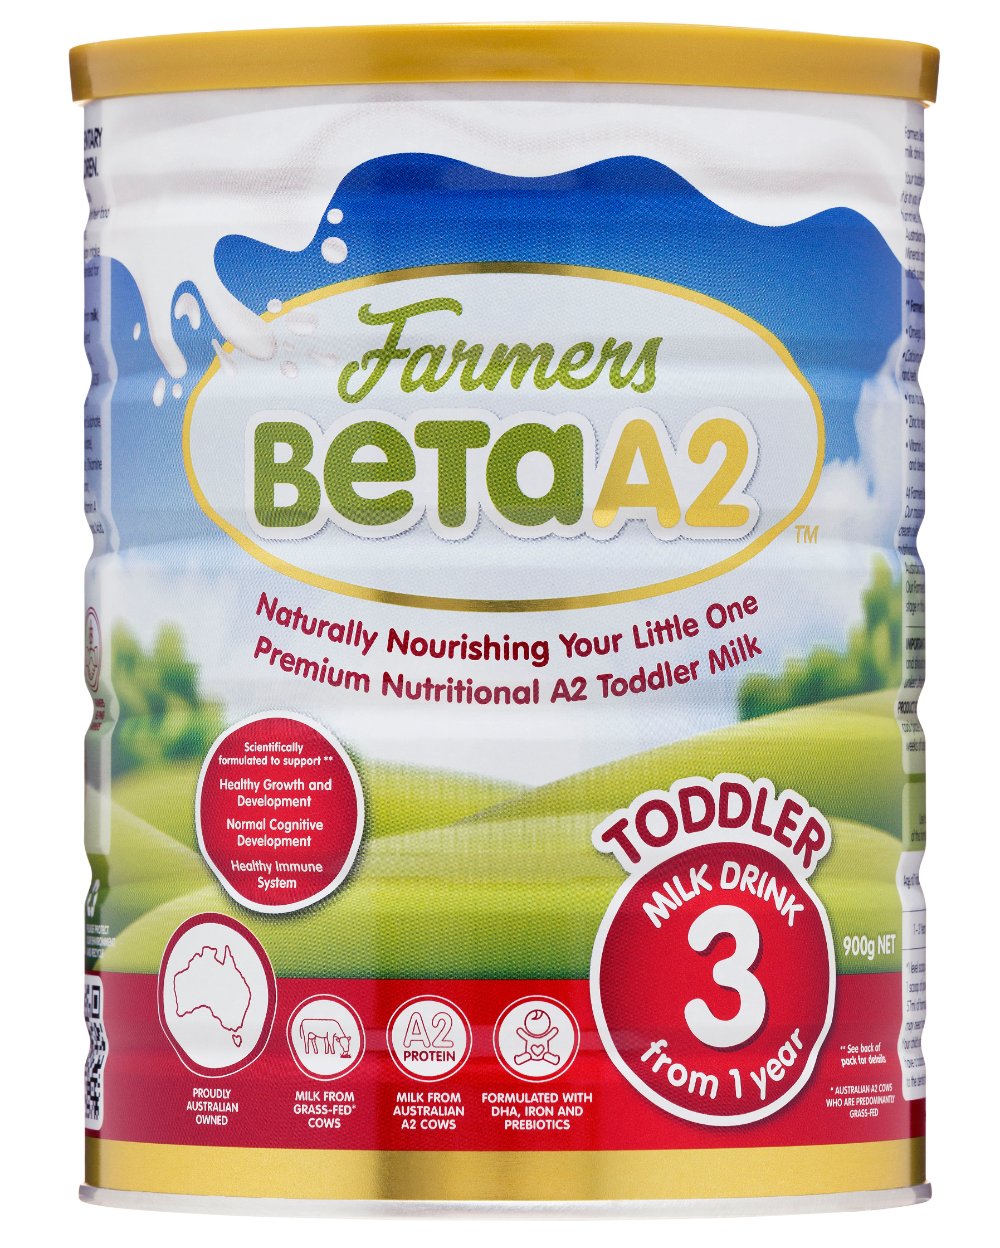 FARMERS BETA A2 NUTRITIONAL TODDLER MILK Stage 3